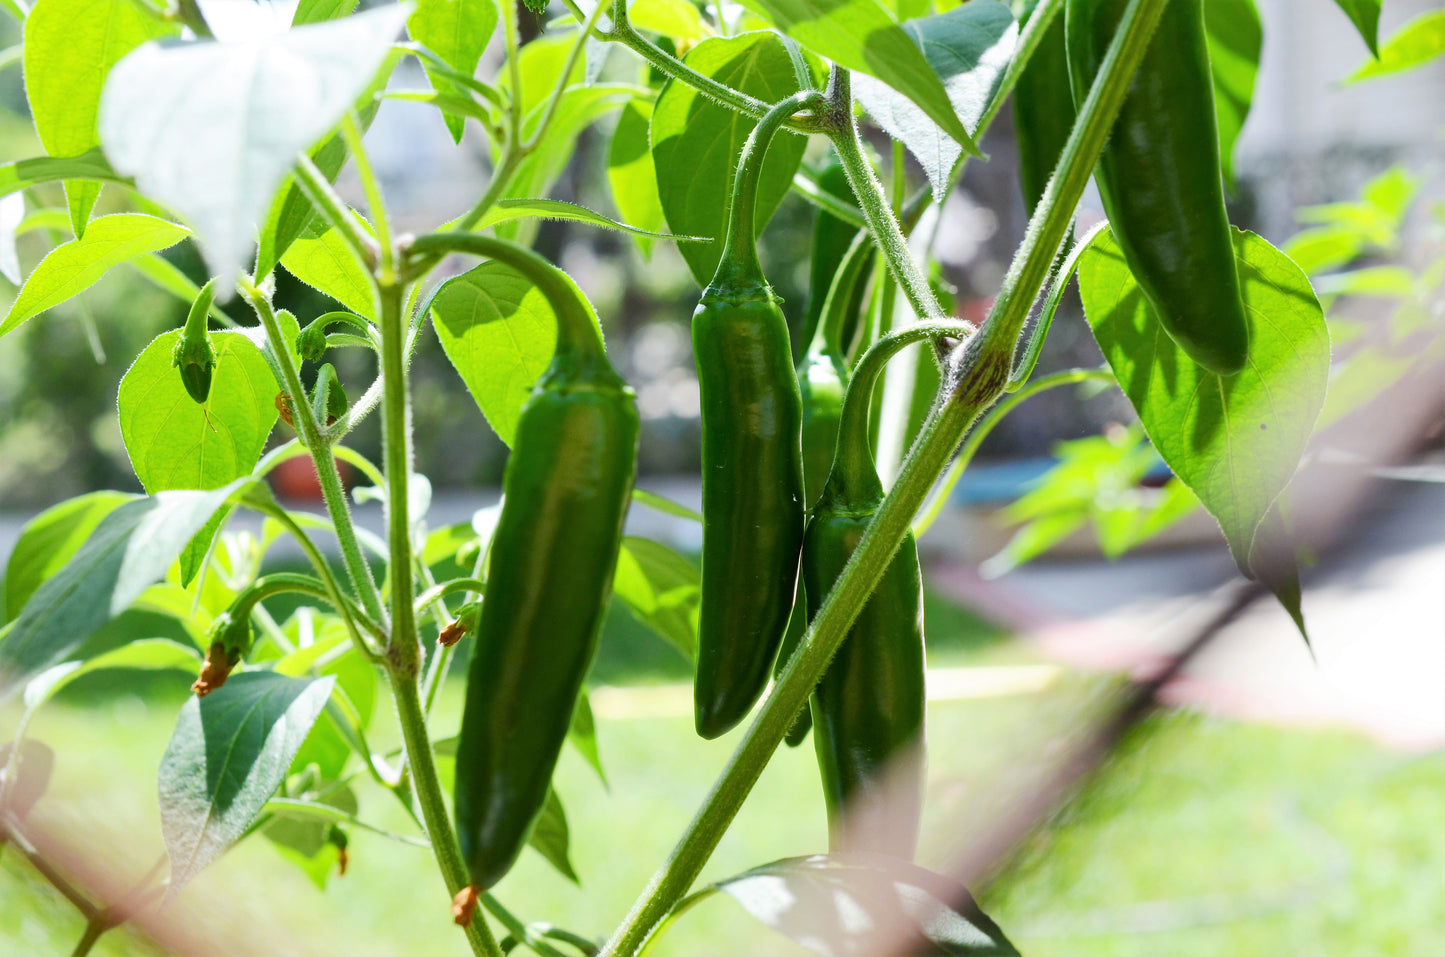 400 HOT JALAPENO PEPPER Capsicum Annuum Mexican Chili Vegetable Seeds